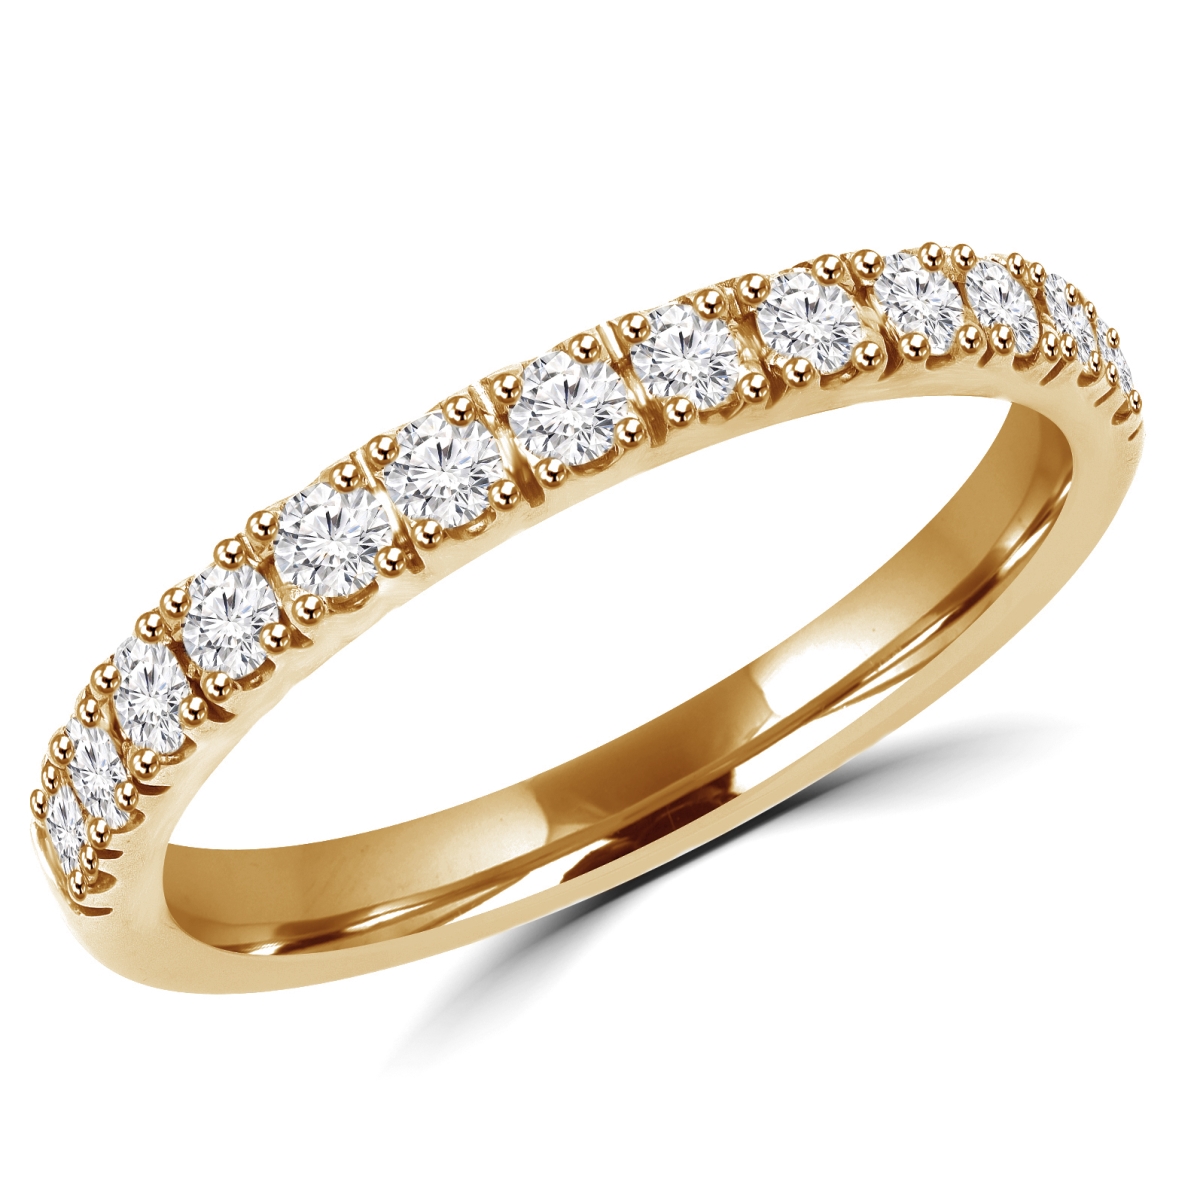 Picture of Majesty Diamonds MD180187-4 0.3 CTW Round Diamond Semi-Eternity Wedding Band Ring in 14K Yellow Gold - Size 4